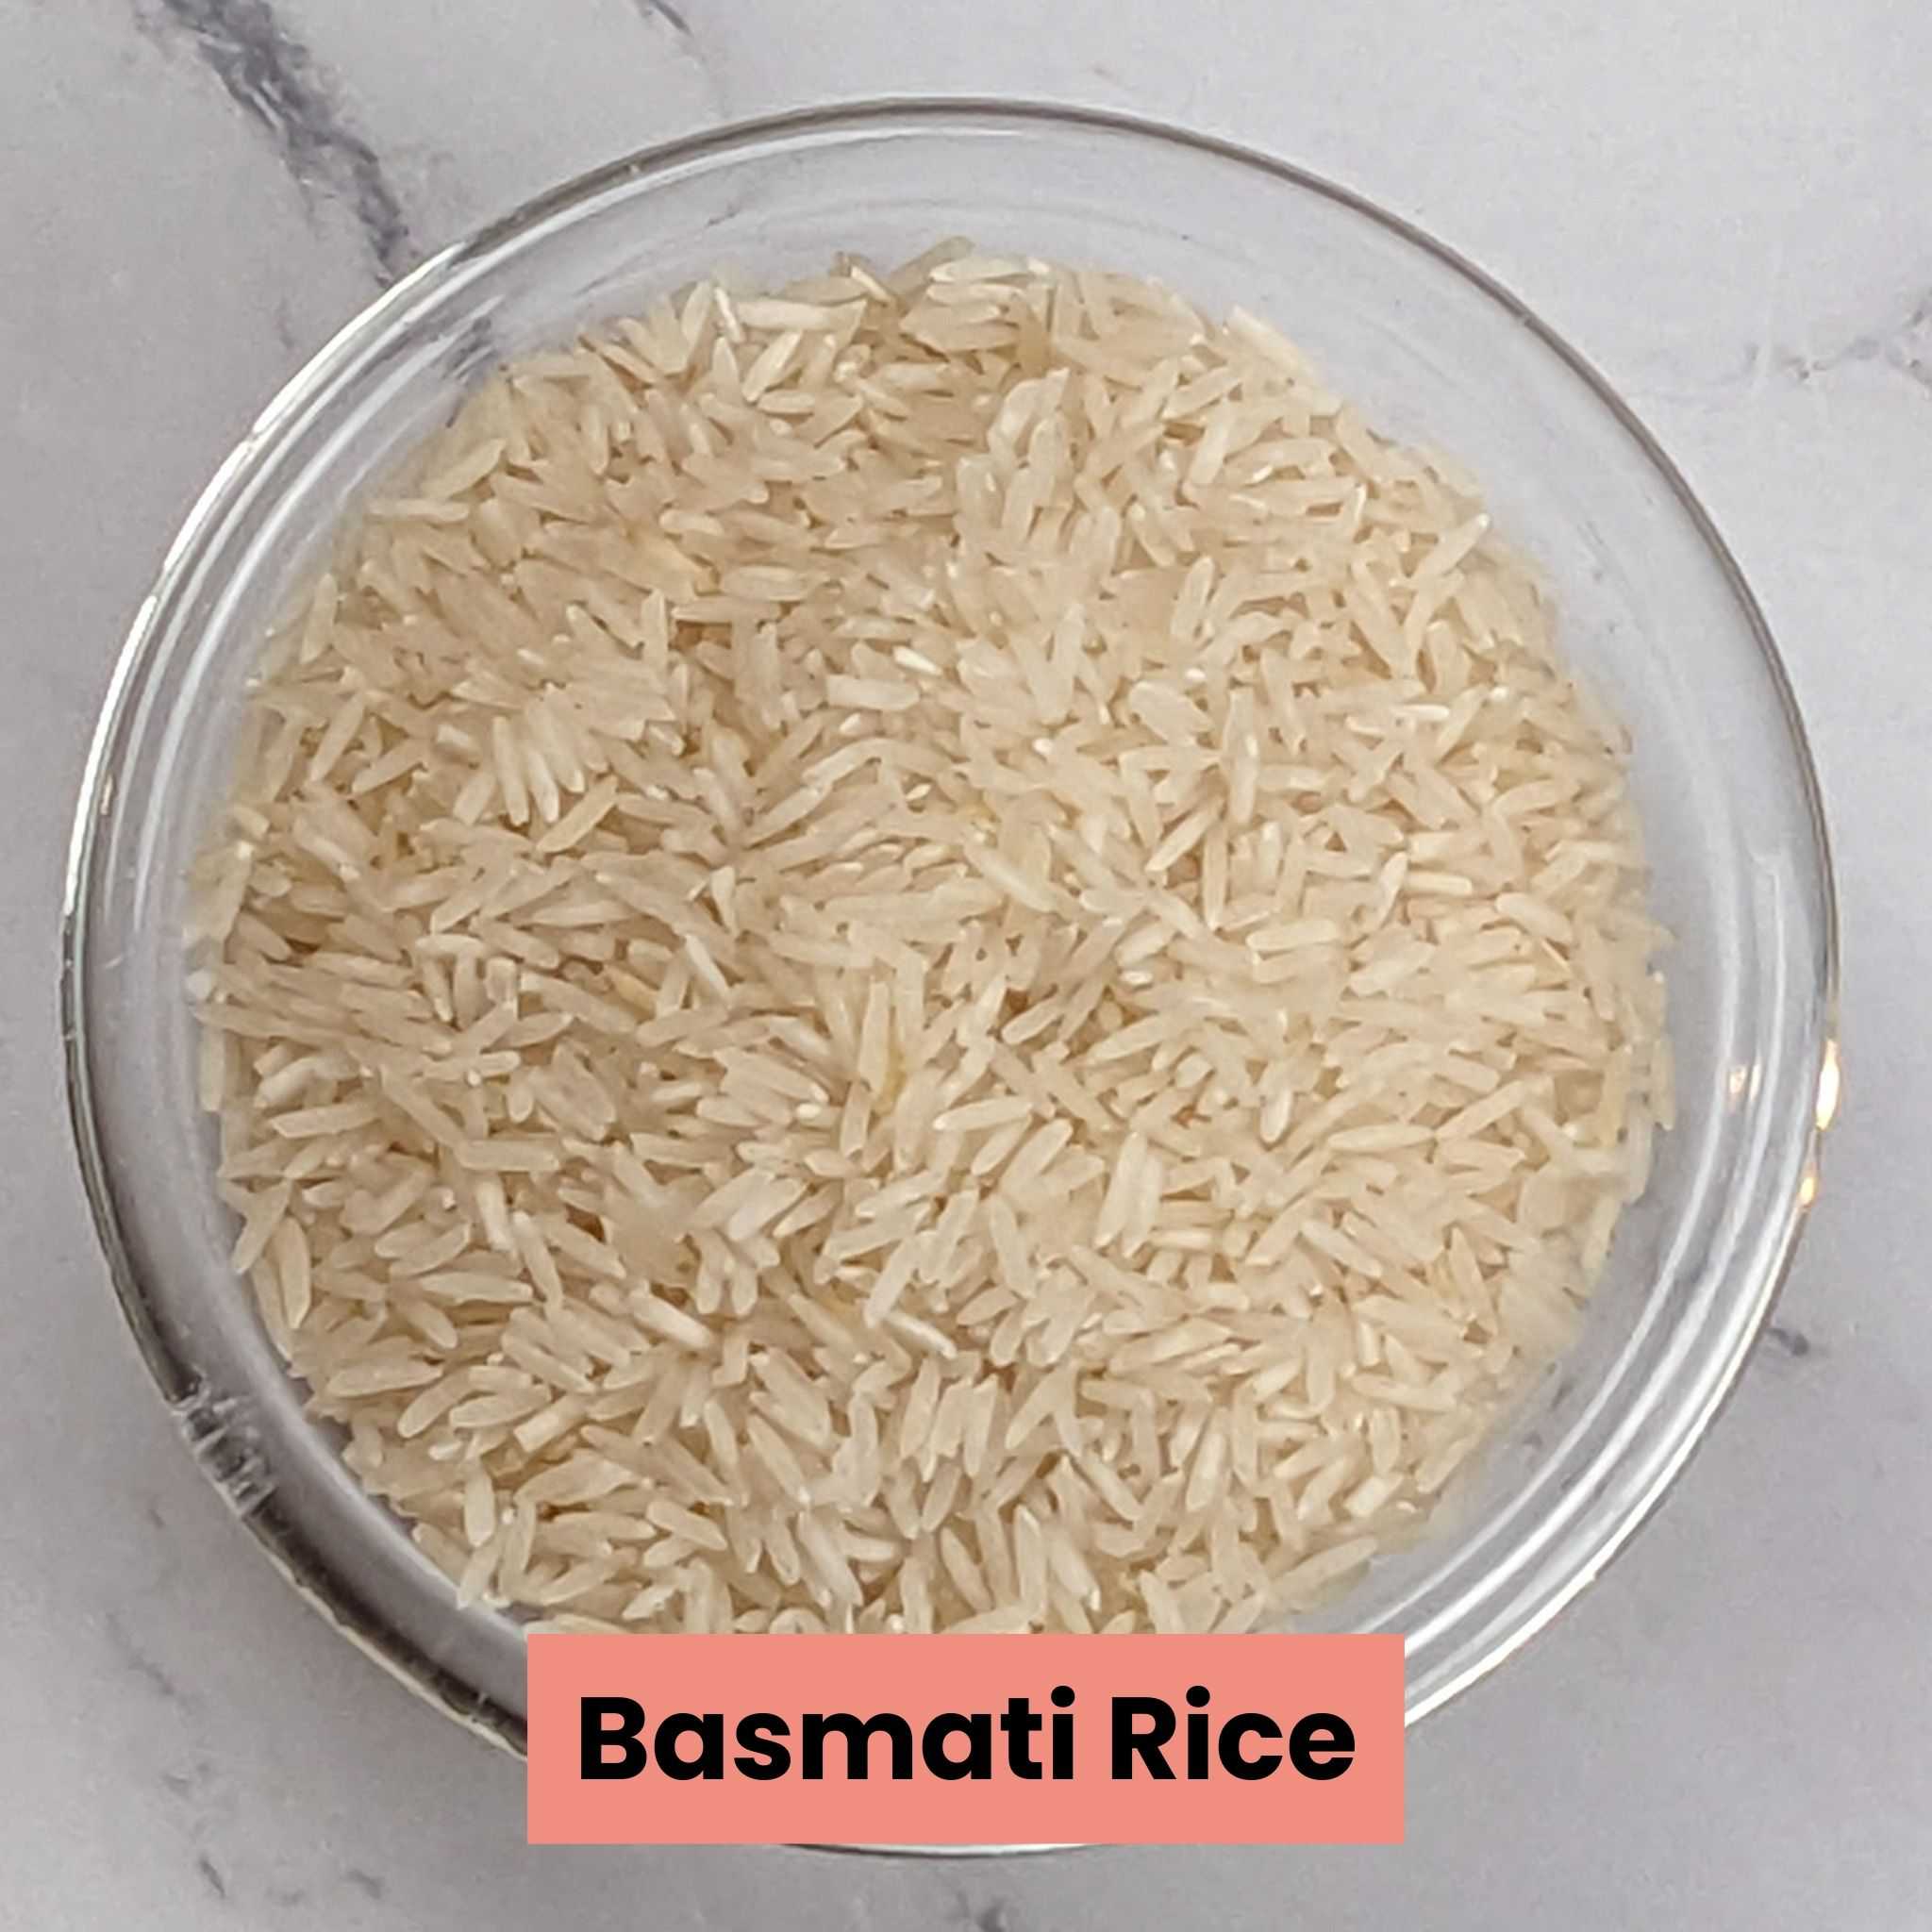 a closes up shot of raw basmati rice in a glass round dish.